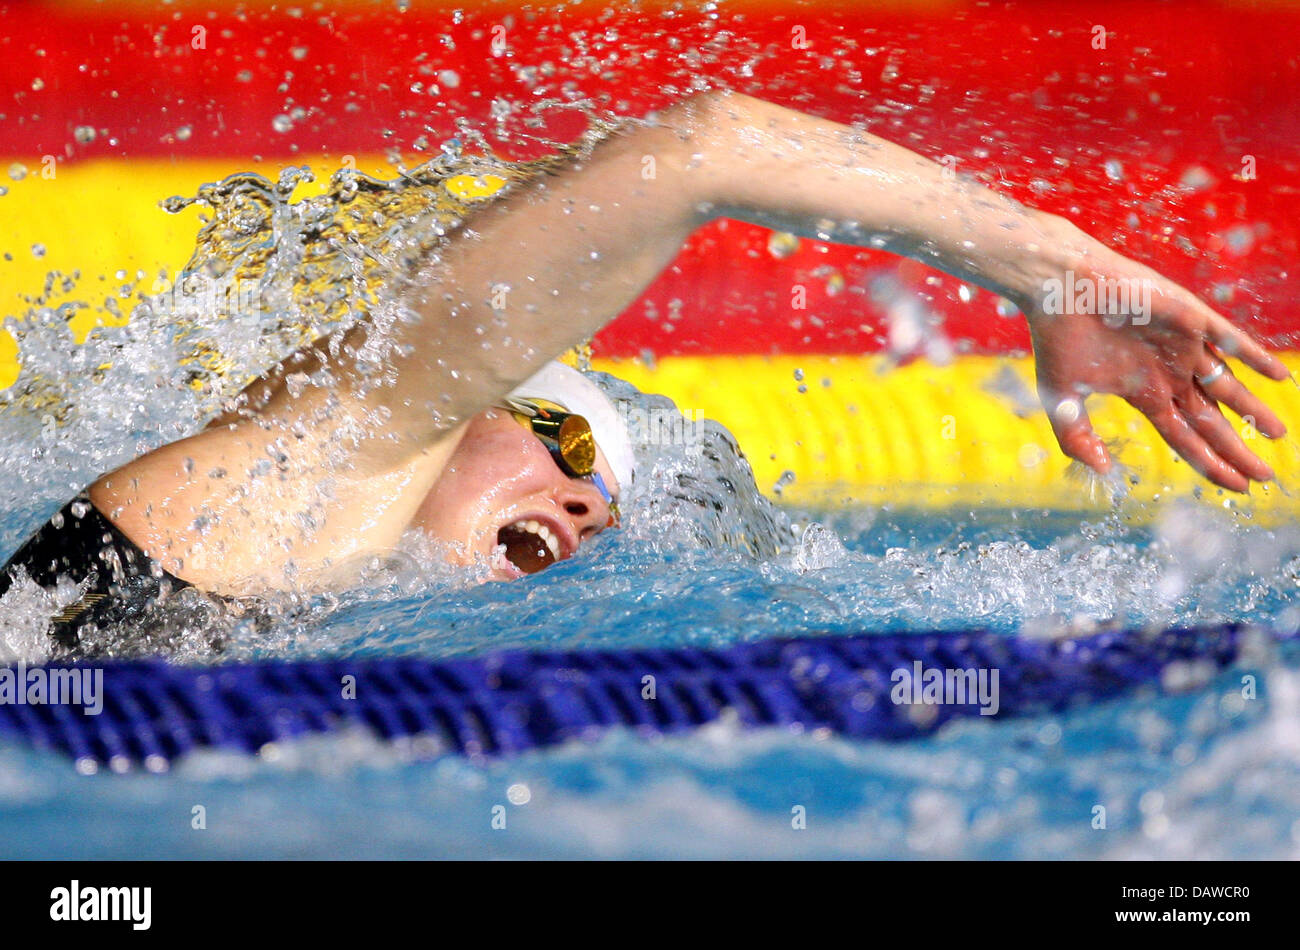 German swimmer Britta Steffen shown in action during the 100 metres freestyle final at the FINA World Swimming Championships in Melbourne, Australia, 30 March 2007. Photo: Gero Breloer Stock Photo